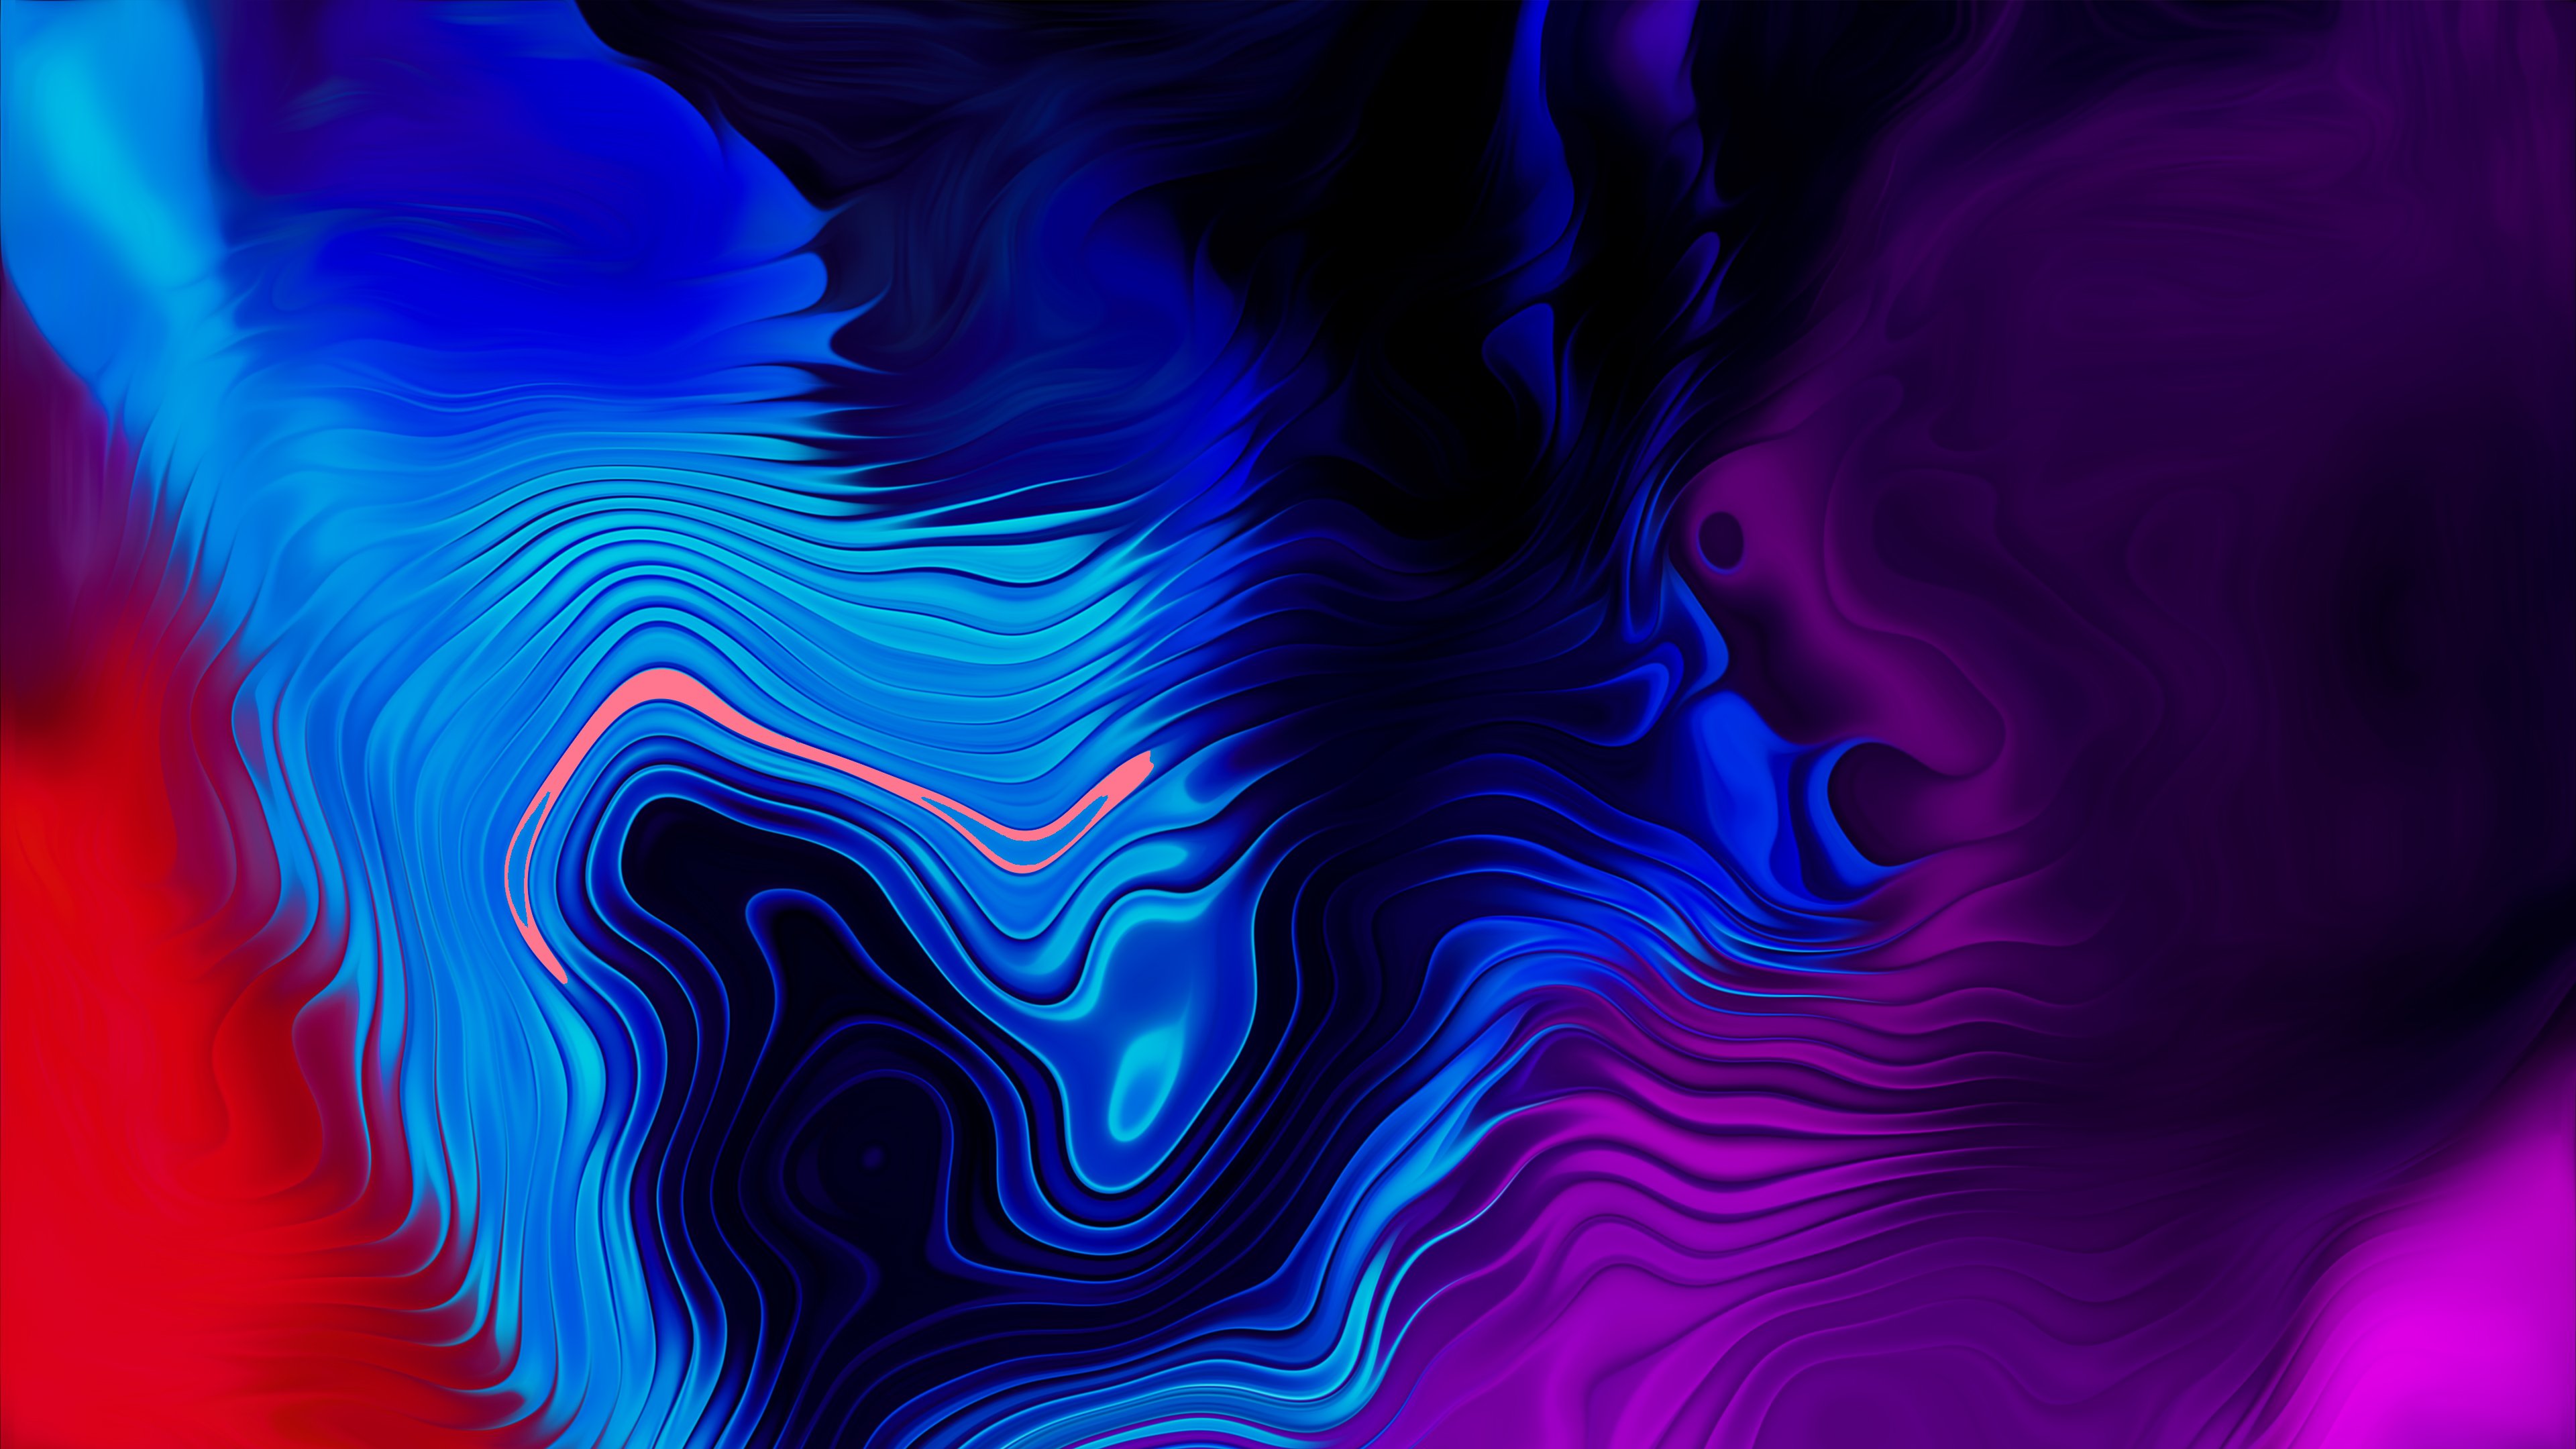 Colors mixed in waves Wallpaper 4k Ultra HD ID:5844